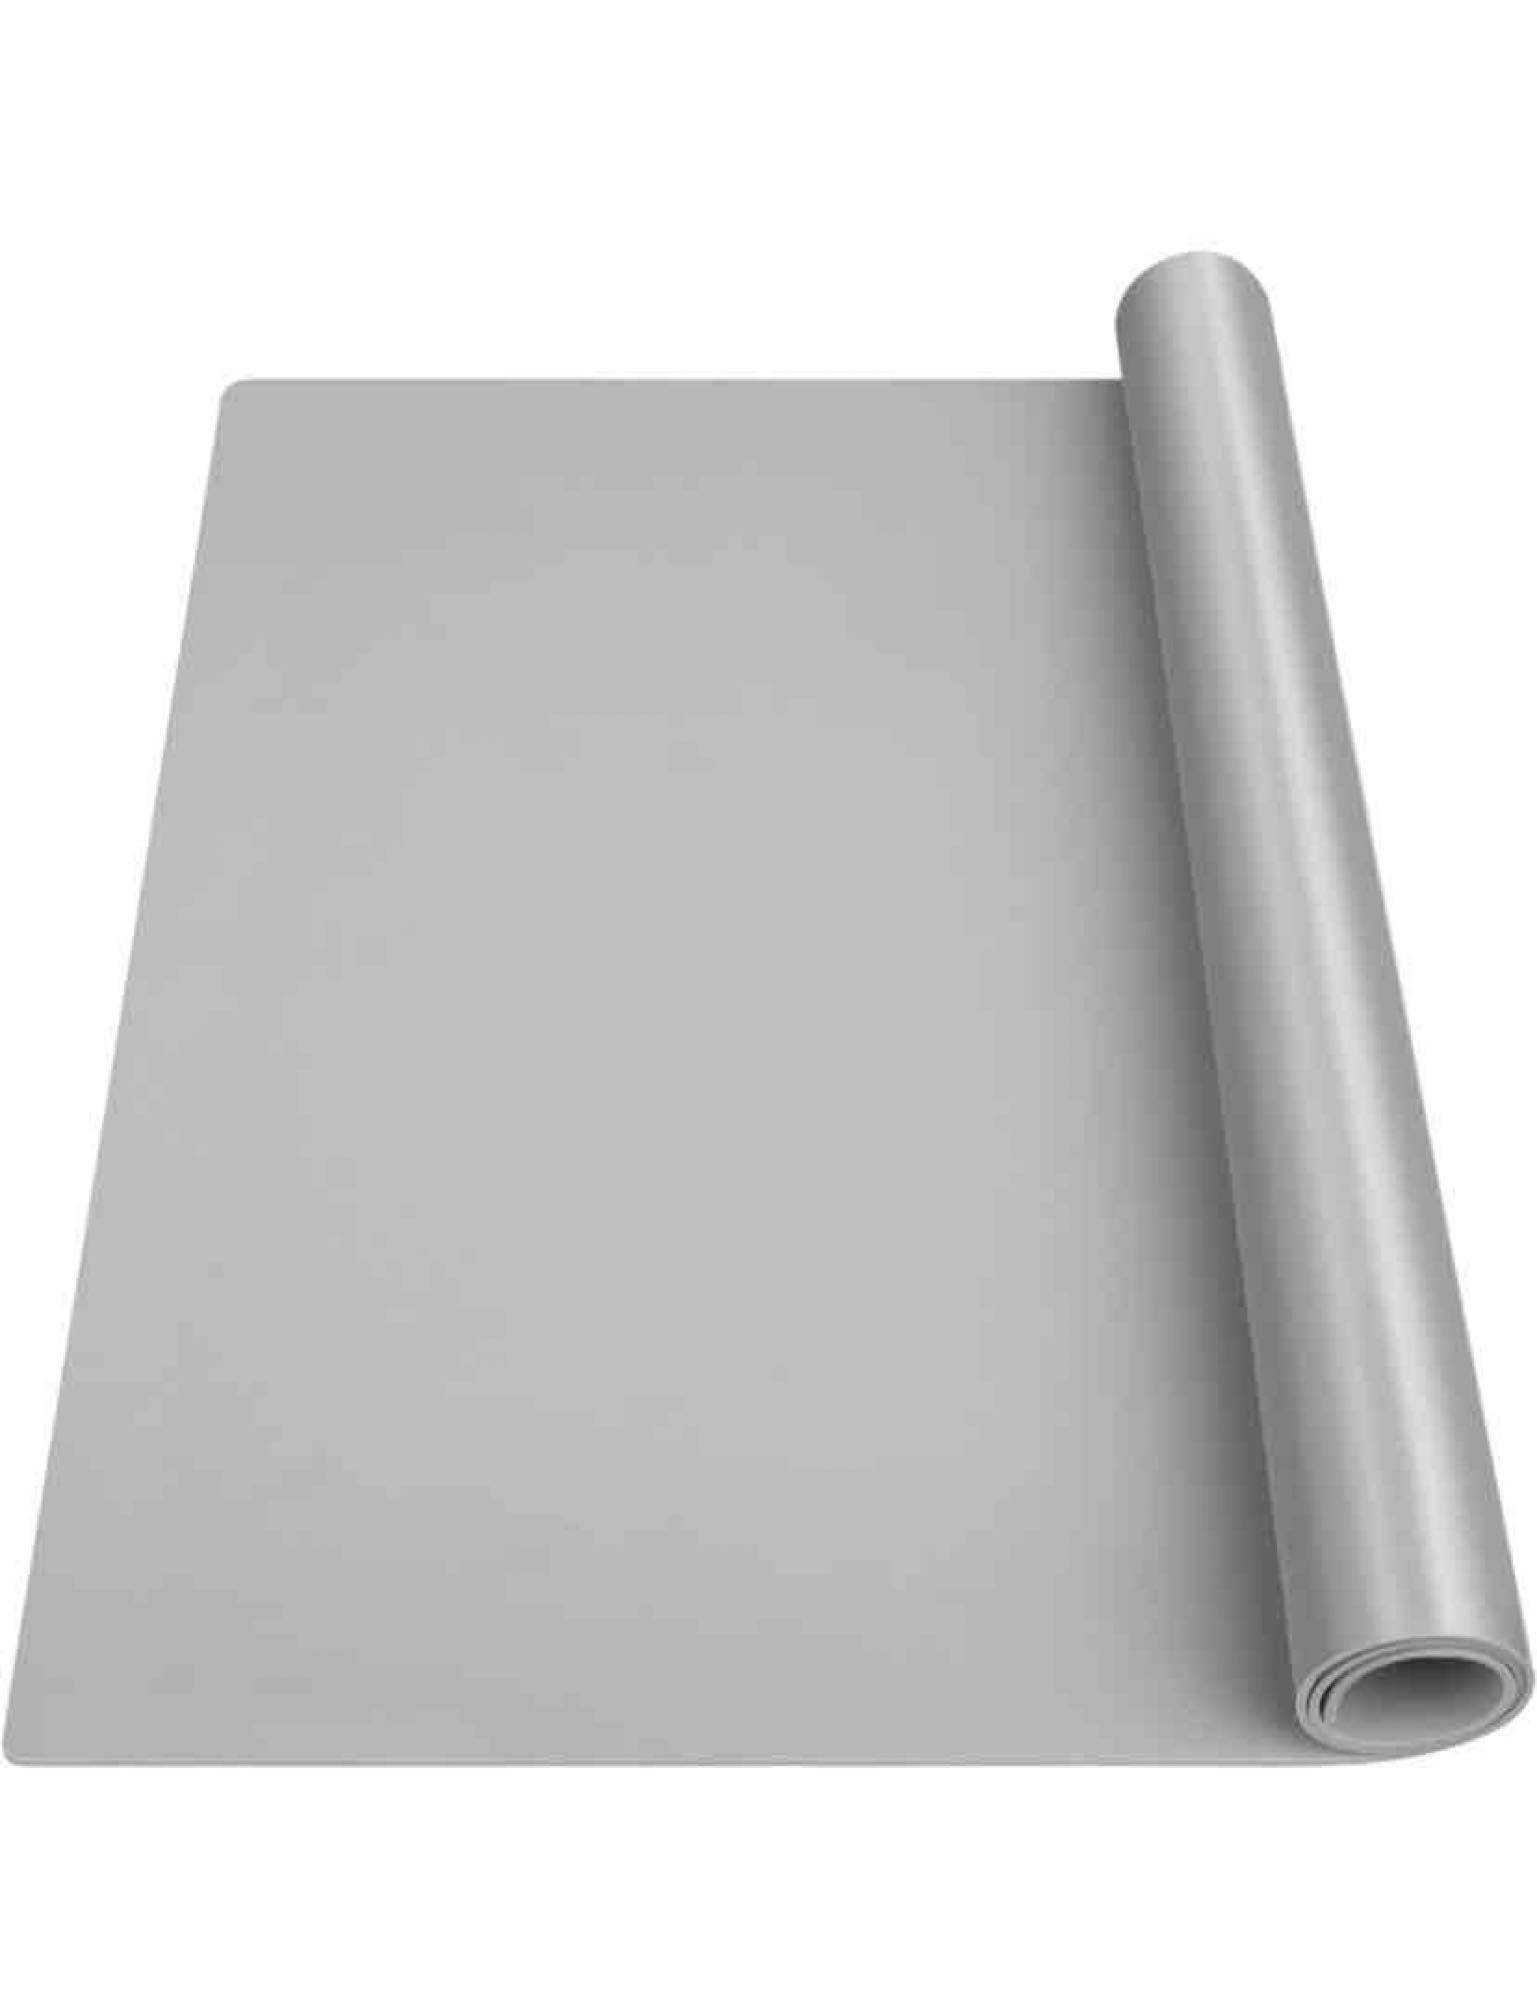 Silicone Mat Heat Resistant Mats for Countertop, 48? x 24?